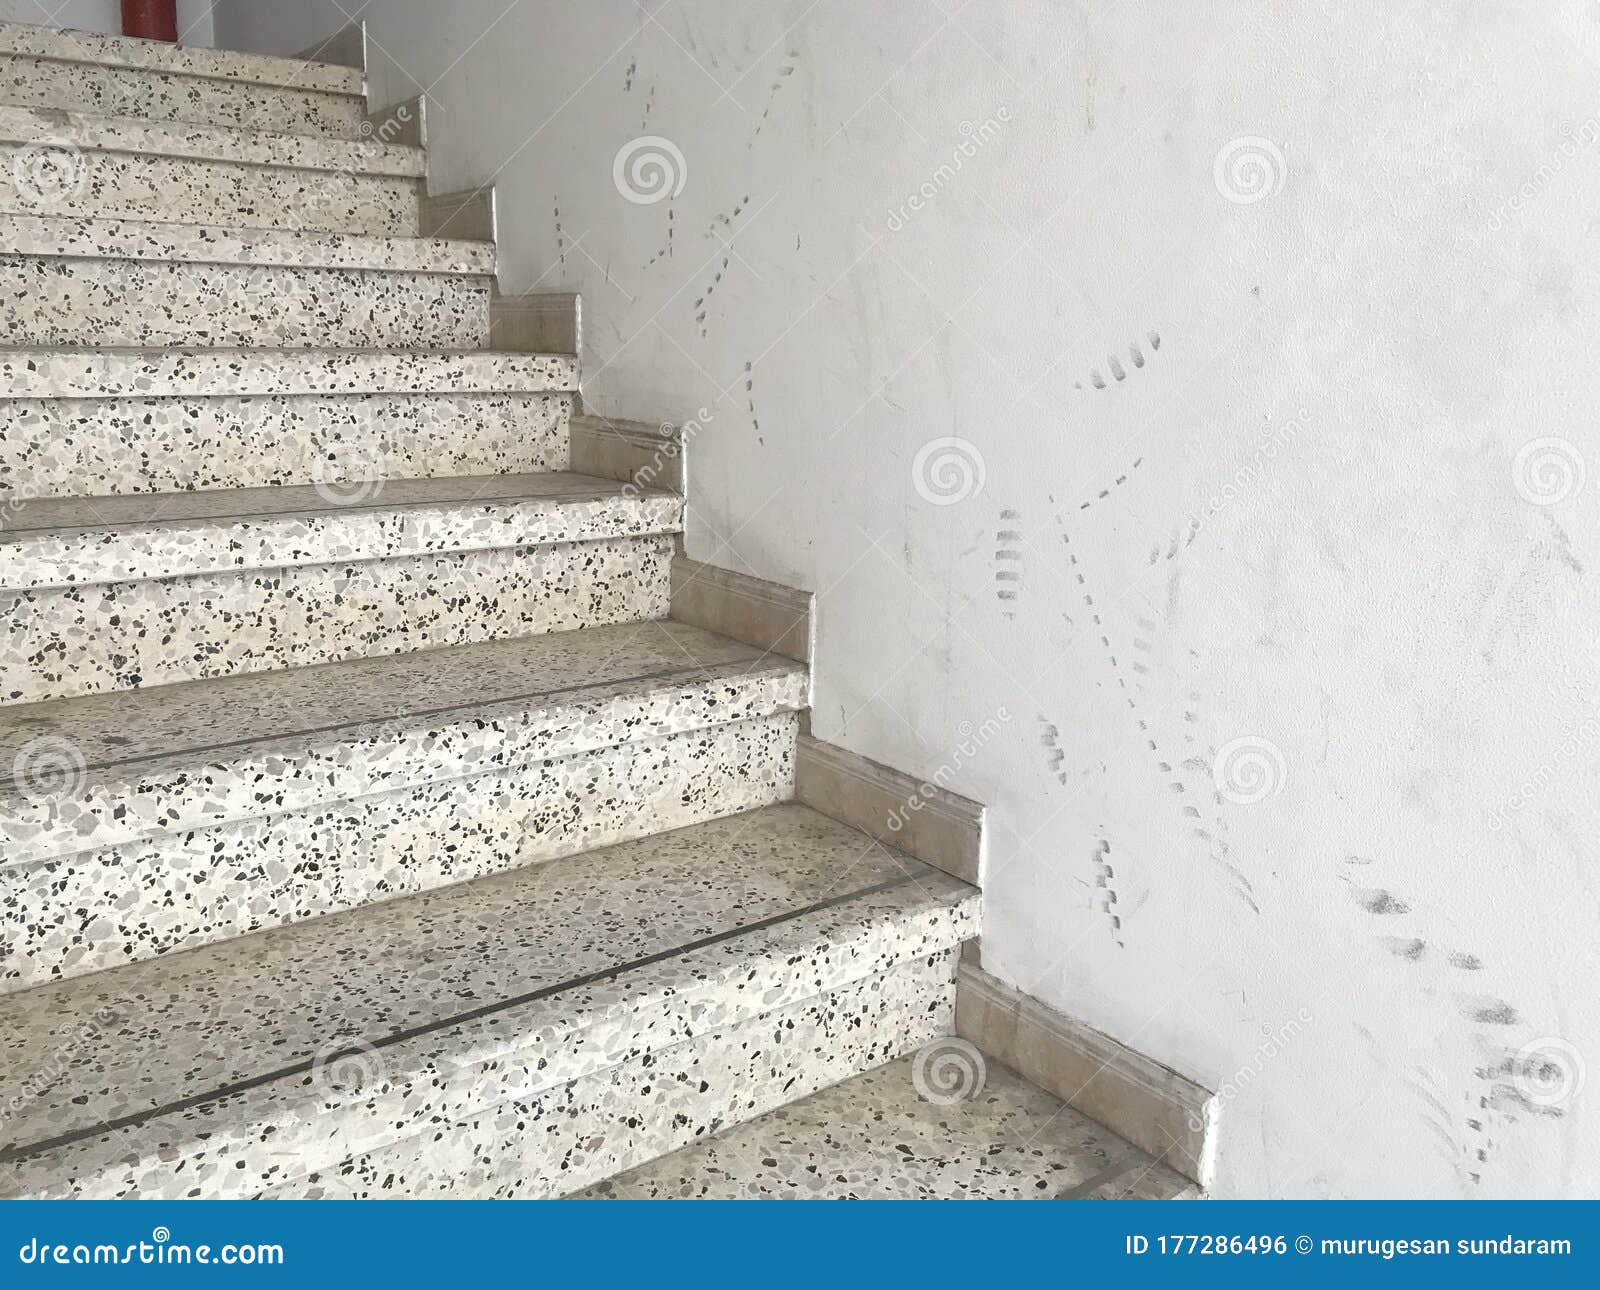 Best Staircase Skirting Designs with Granite and Tile  Attractive  Staircase Granite Skirting Ideas  YouTube